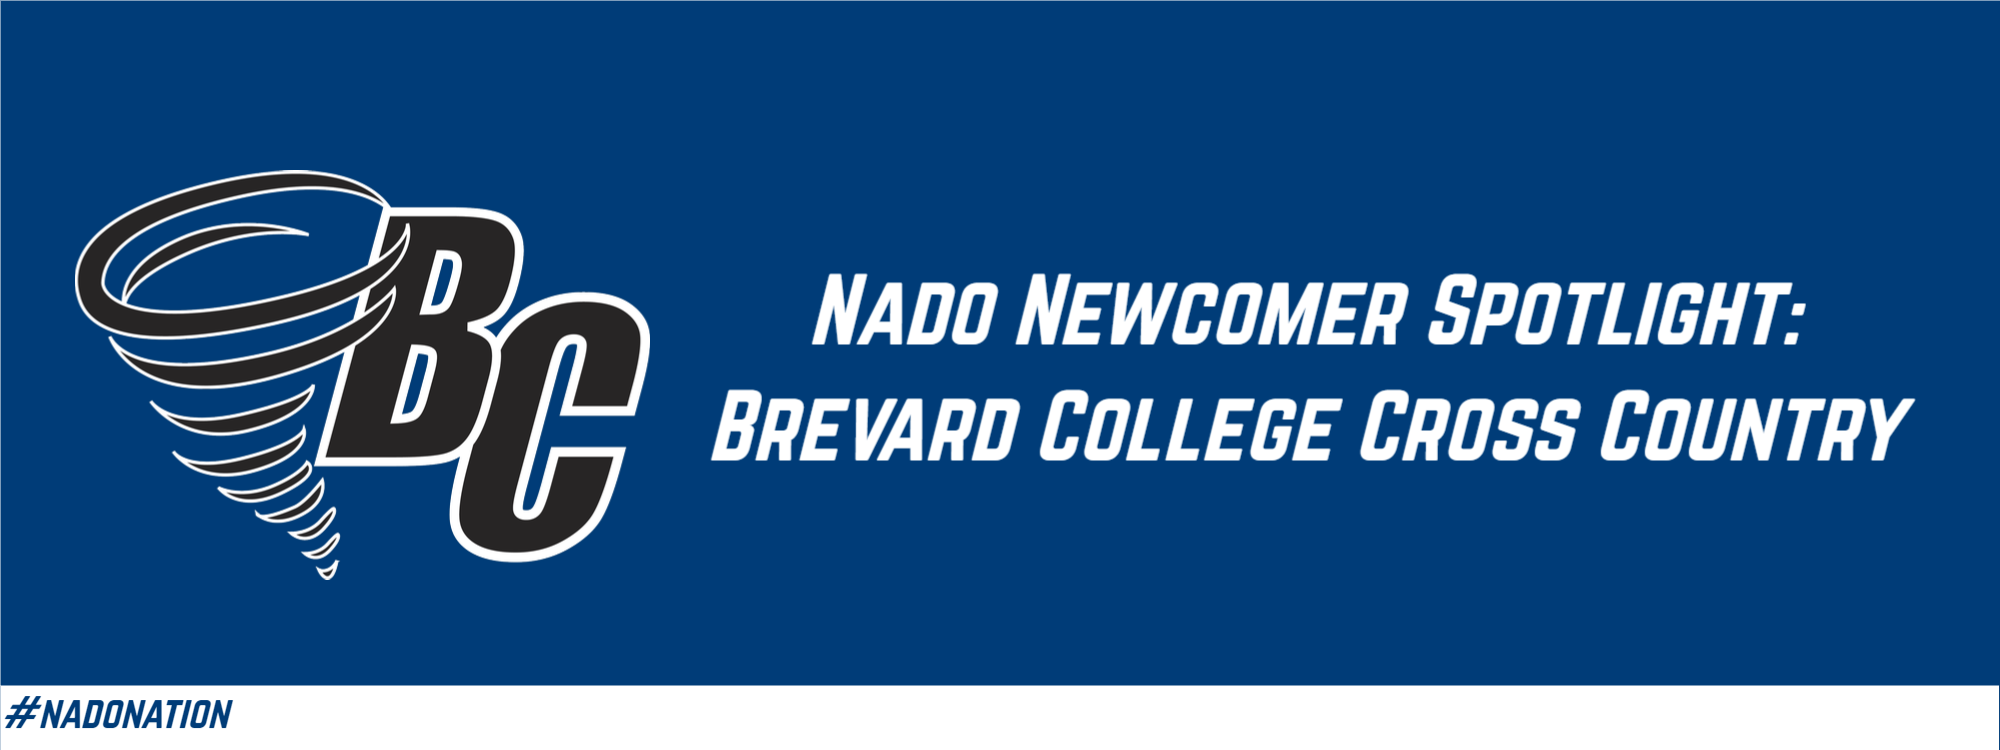 Nado Newcomer Spotlight: Cross Country Welcomes 10 to 2020-21 Squad